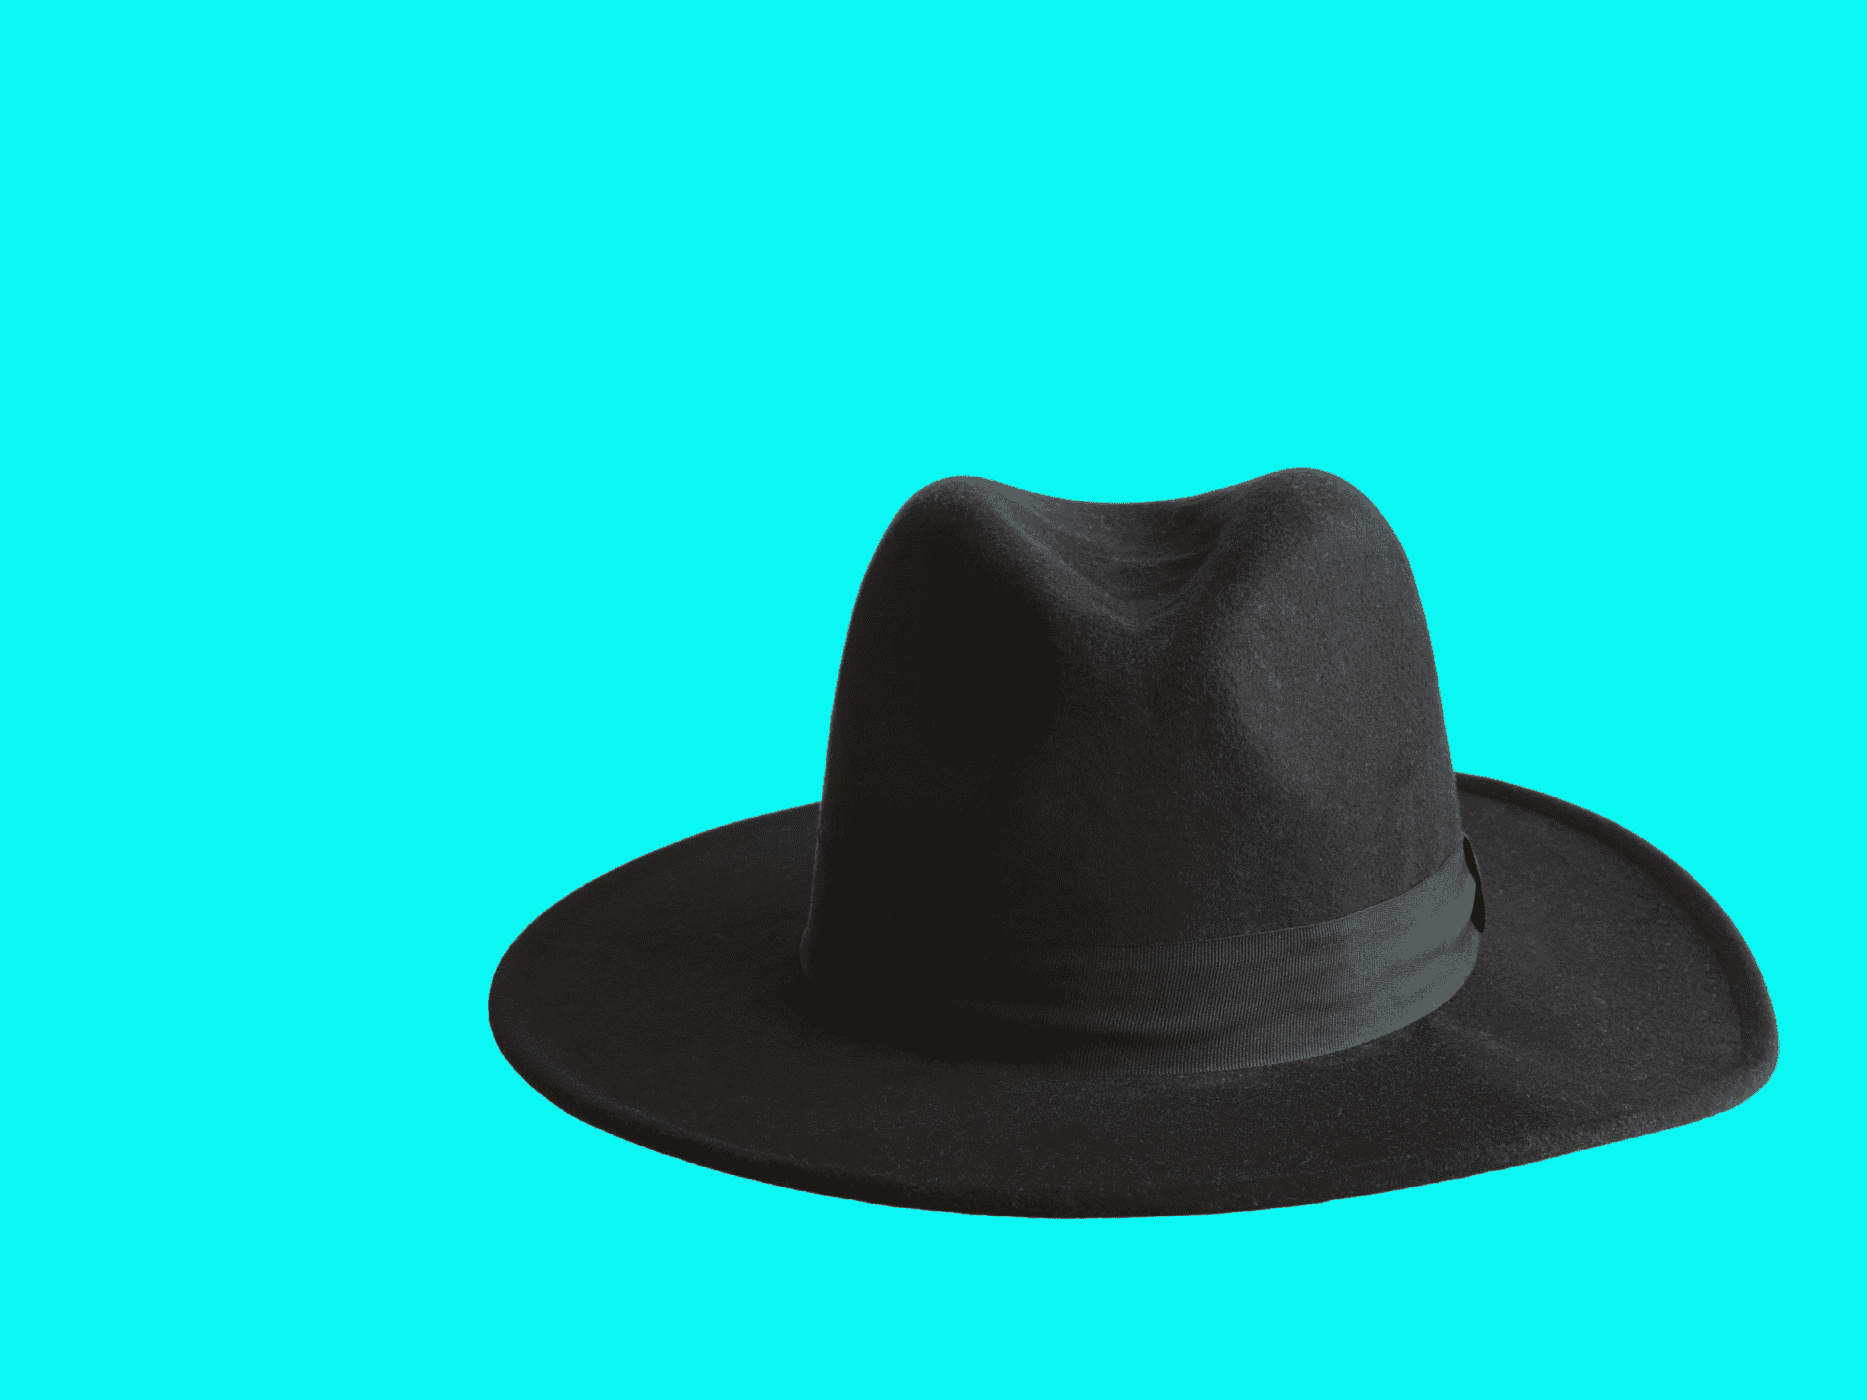 Don’t let your dental SEO company pull a (black) hat over your eyes